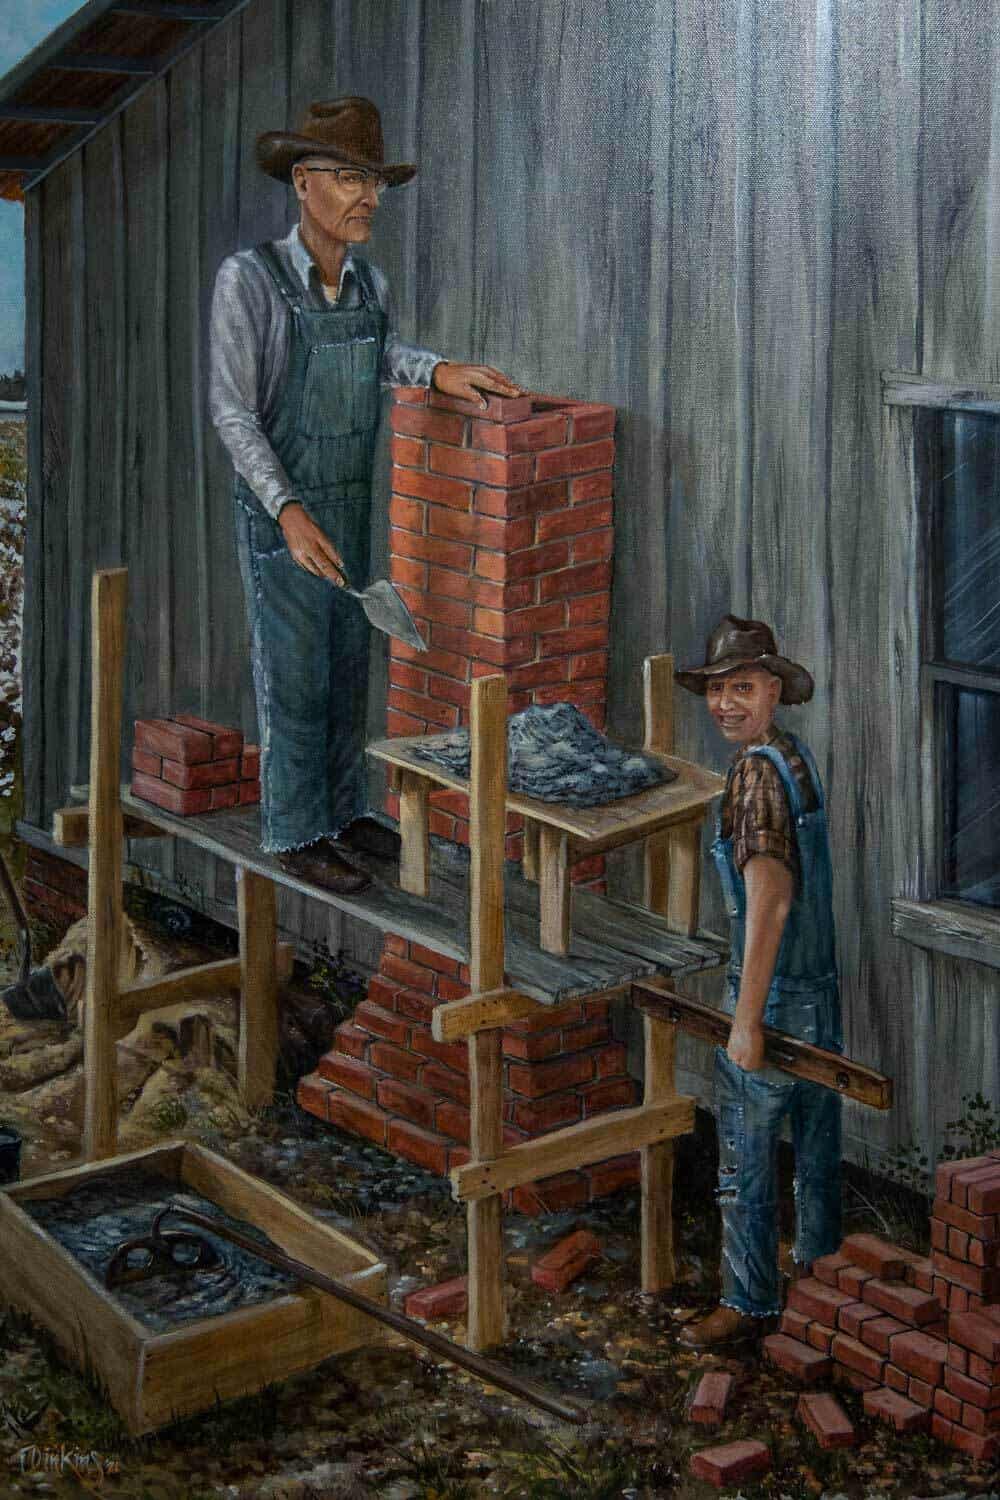 Donnie commissioned this painting of his masonry predecessors, Paw Mac and Curtis McVay.